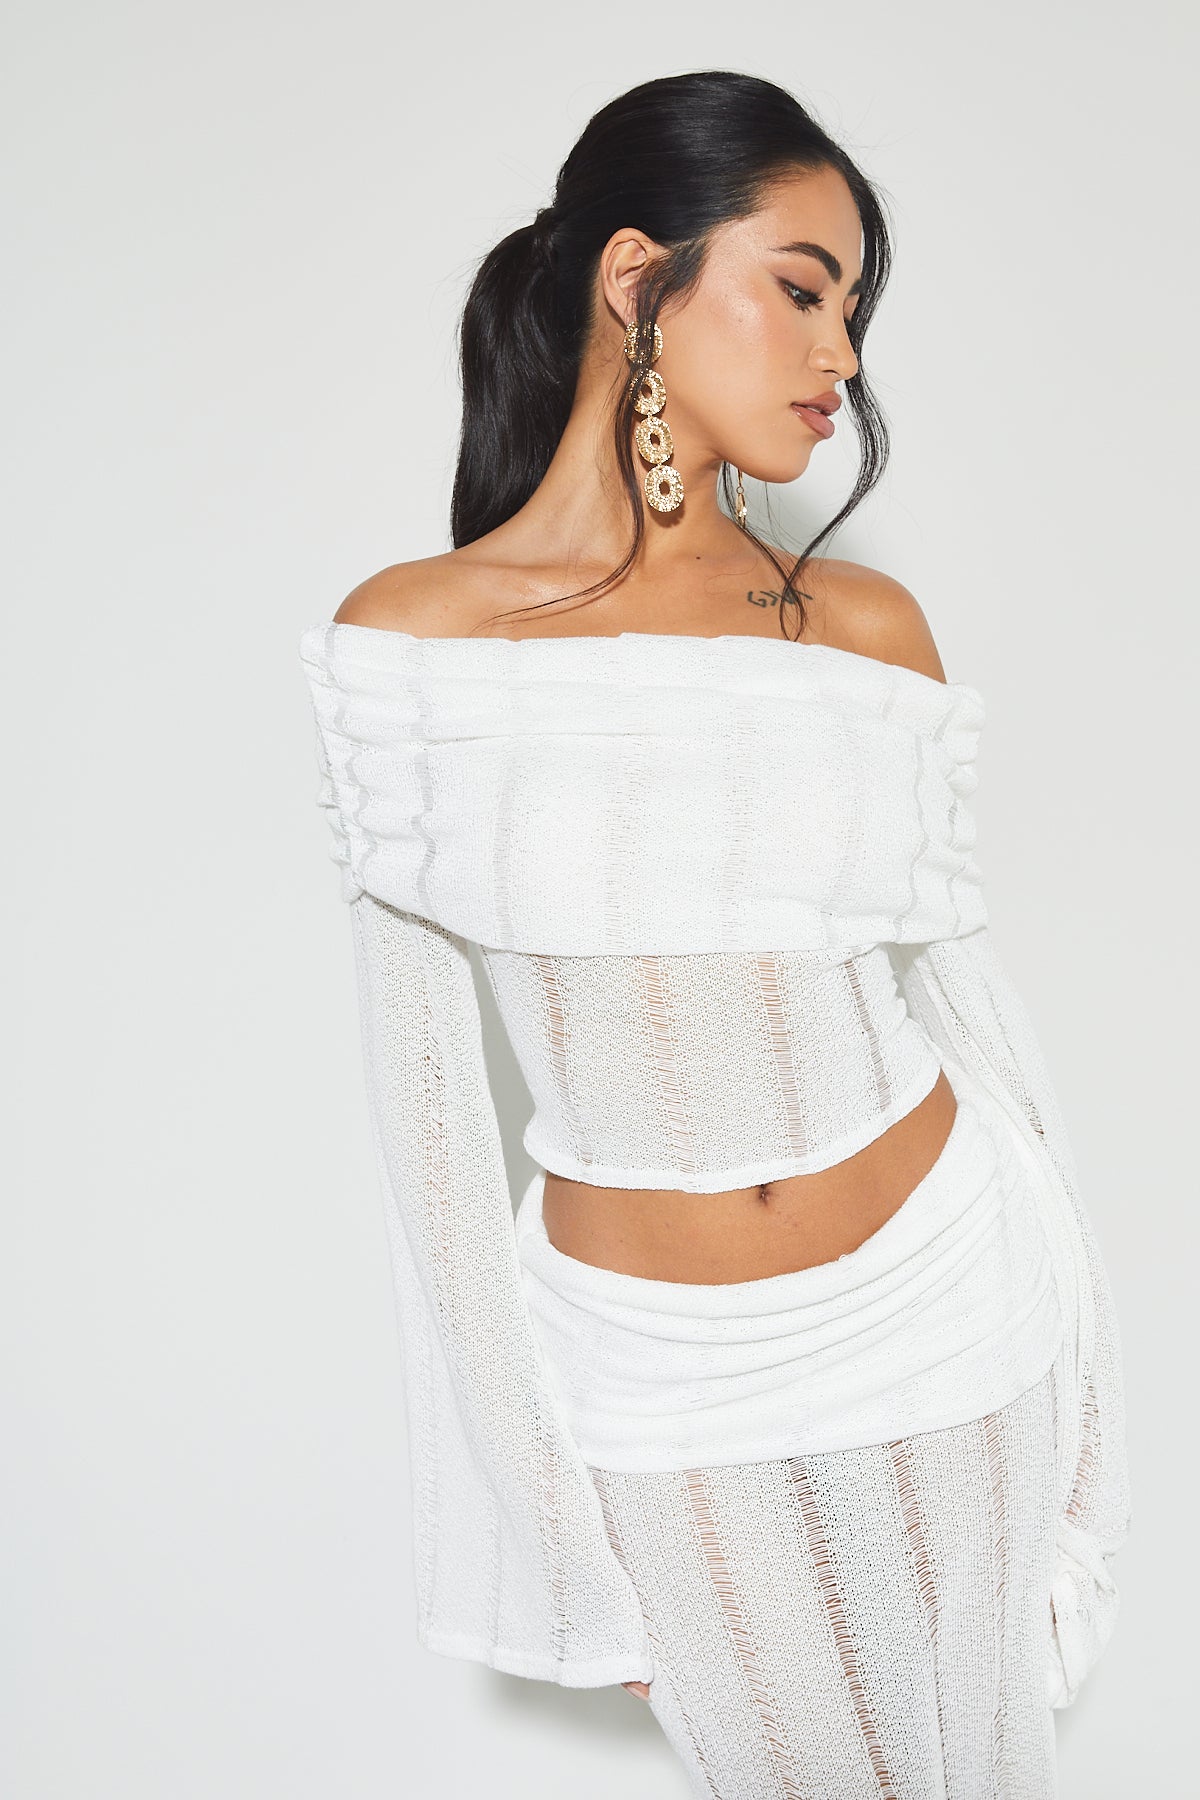 NORI White Knit Top and Maxi Skirt Co Ord